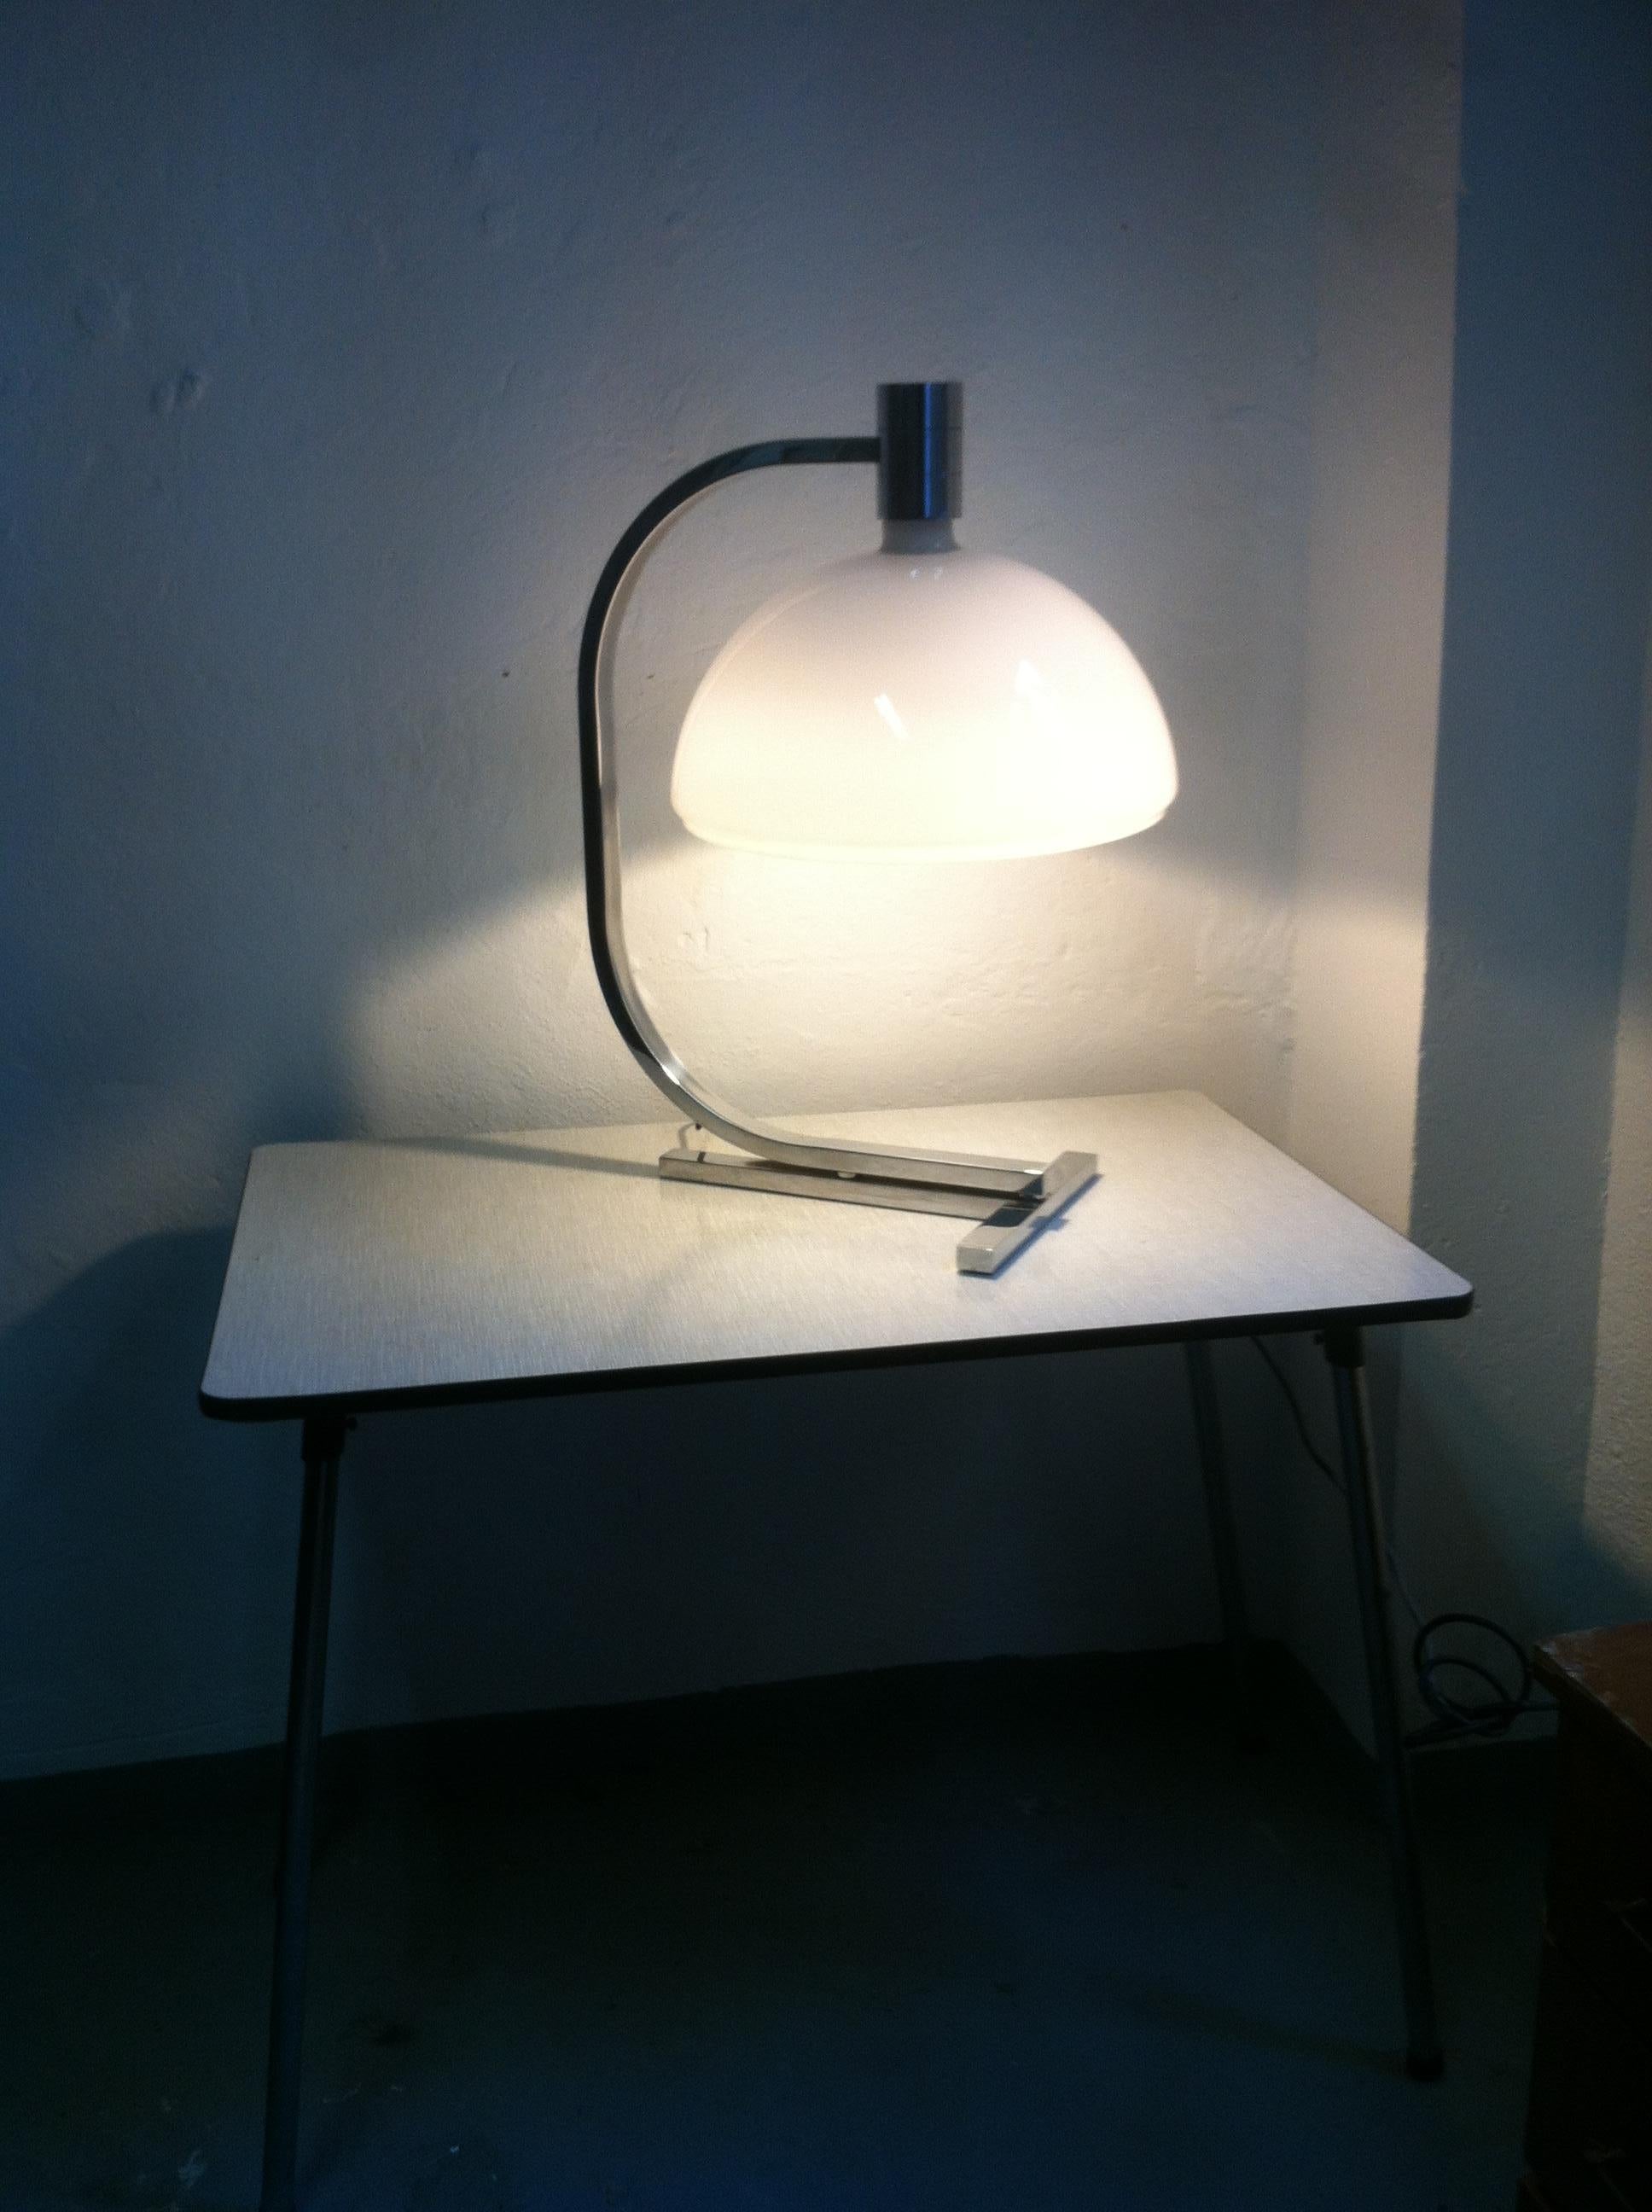 Opaline Glass Midcentury AM/AS Table Lamp by Helg, Piva, and Albini for Sirrah Large, 1969 For Sale